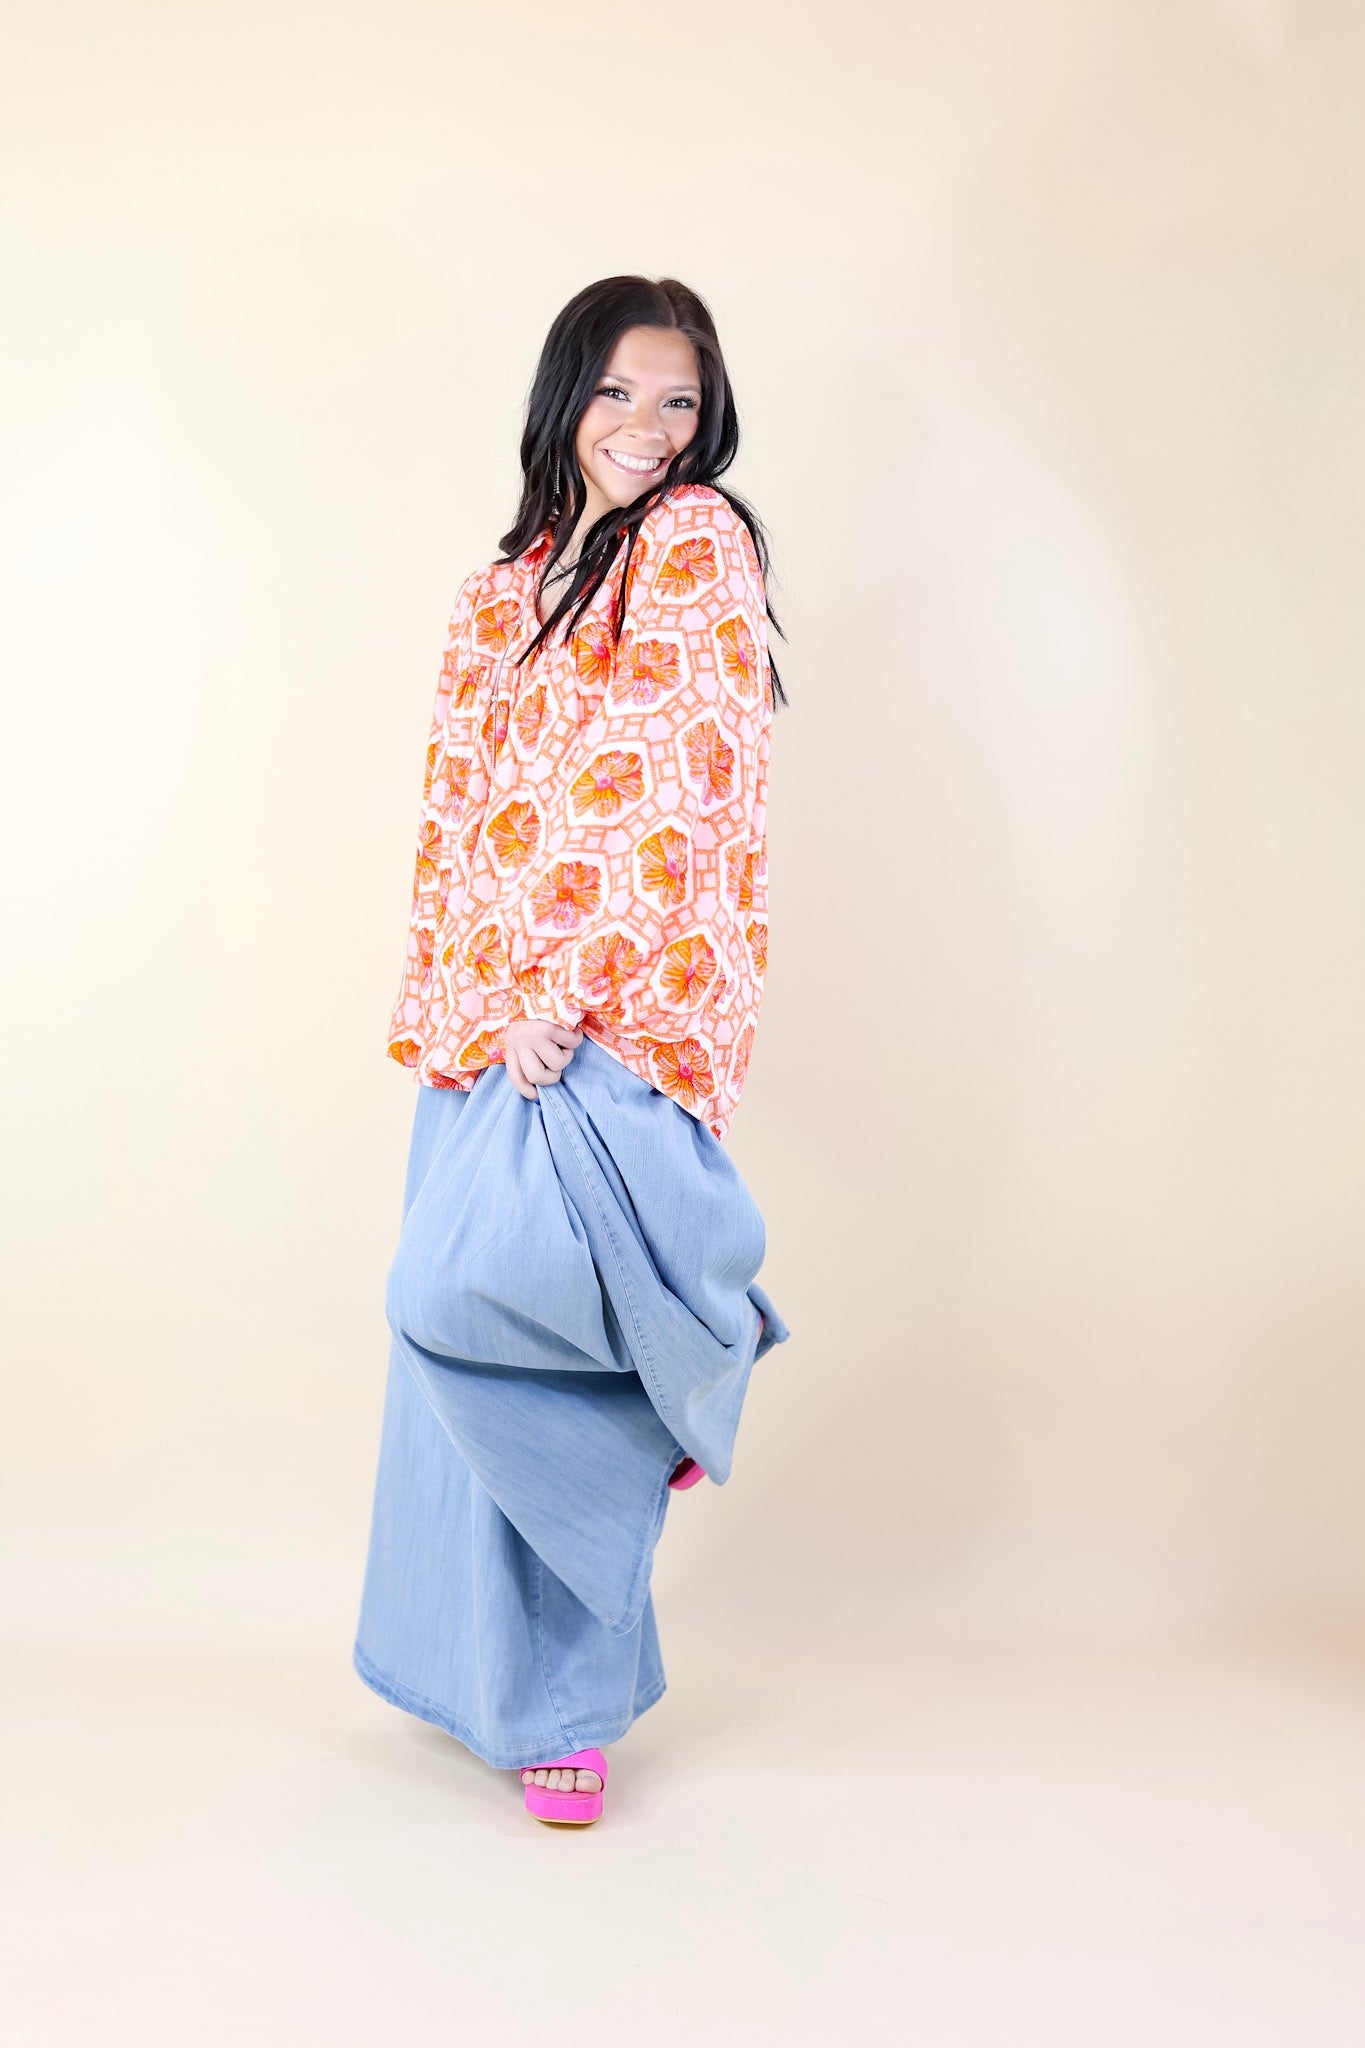 Emily McCarthy | Palazzo Pant in Denim - Giddy Up Glamour Boutique